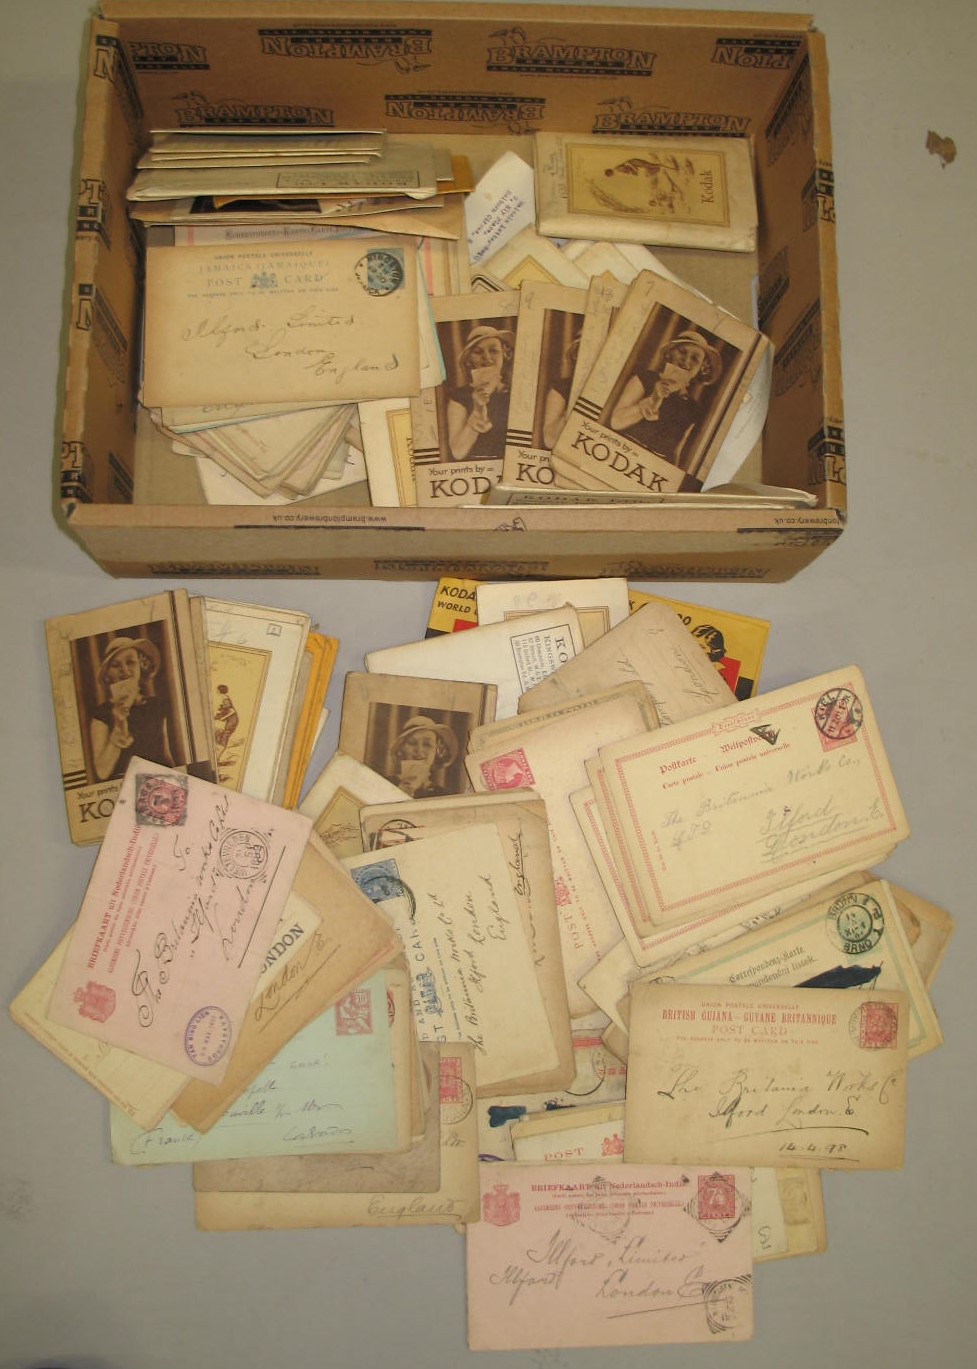 POSTCARDS, q. 19th c. non-pictorial; misc. photographic negs in original wallets (Q).